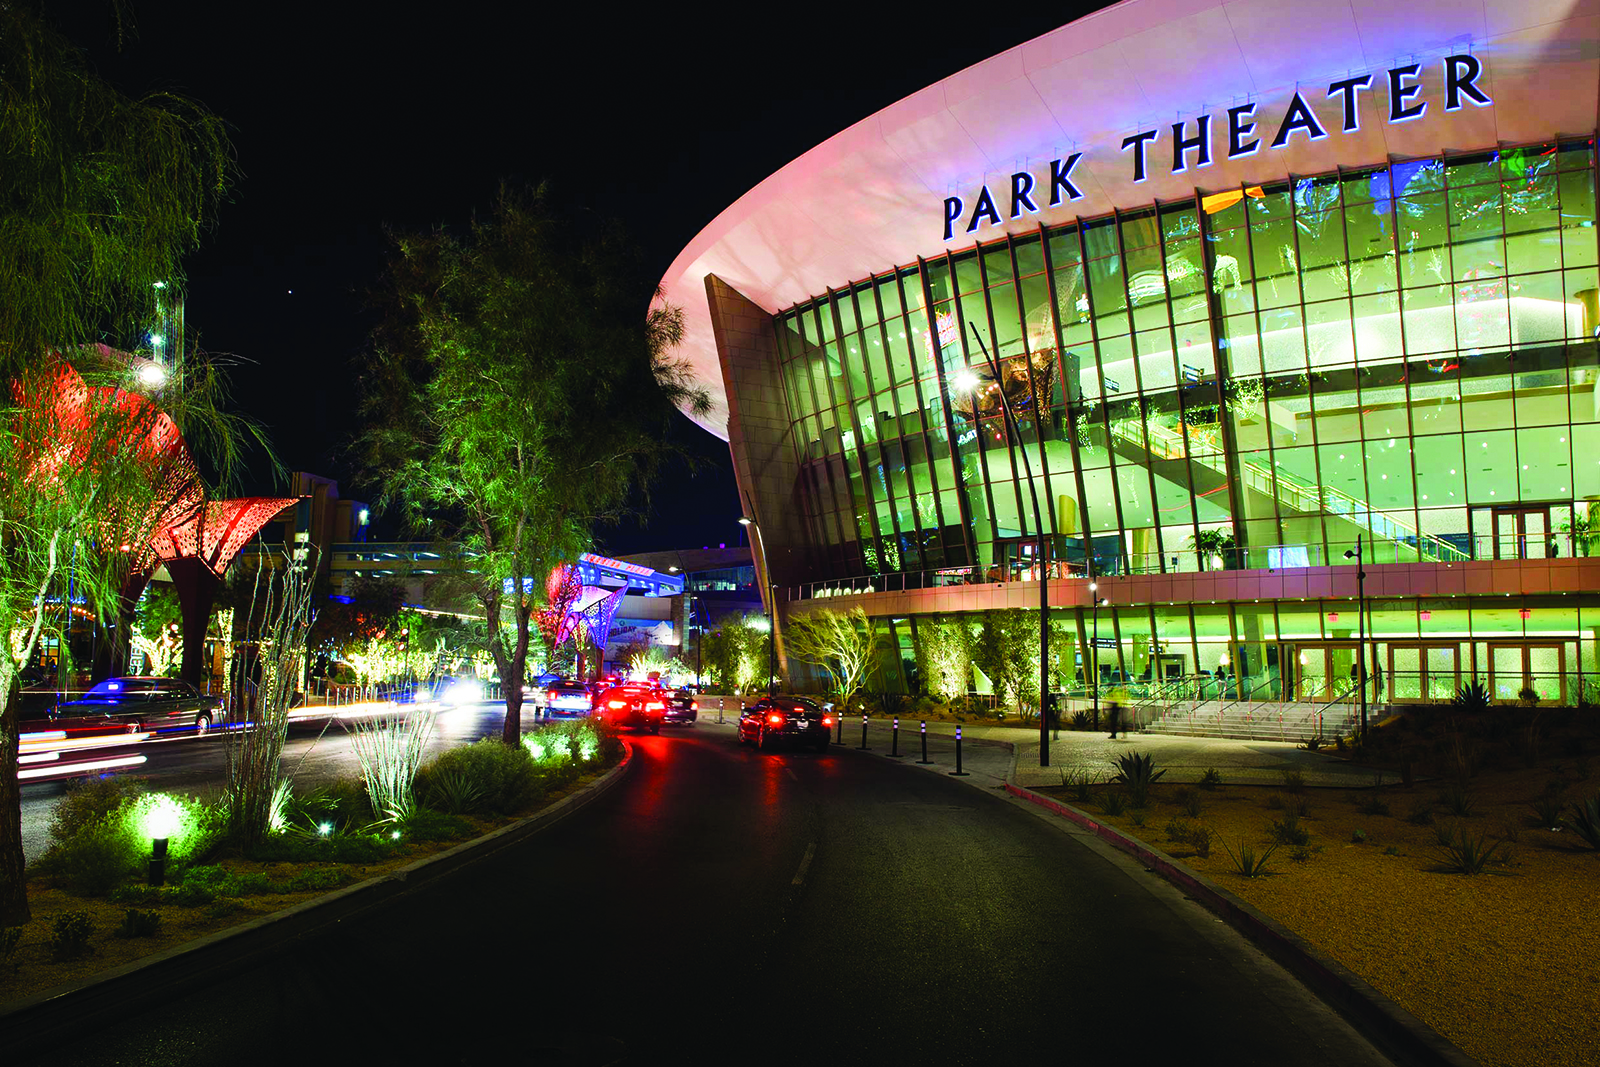 Park Theater shows, times, seating chart, events, Lady Gaga, and Aerosmith.  Located in Park MGM Las Vegas, NV.